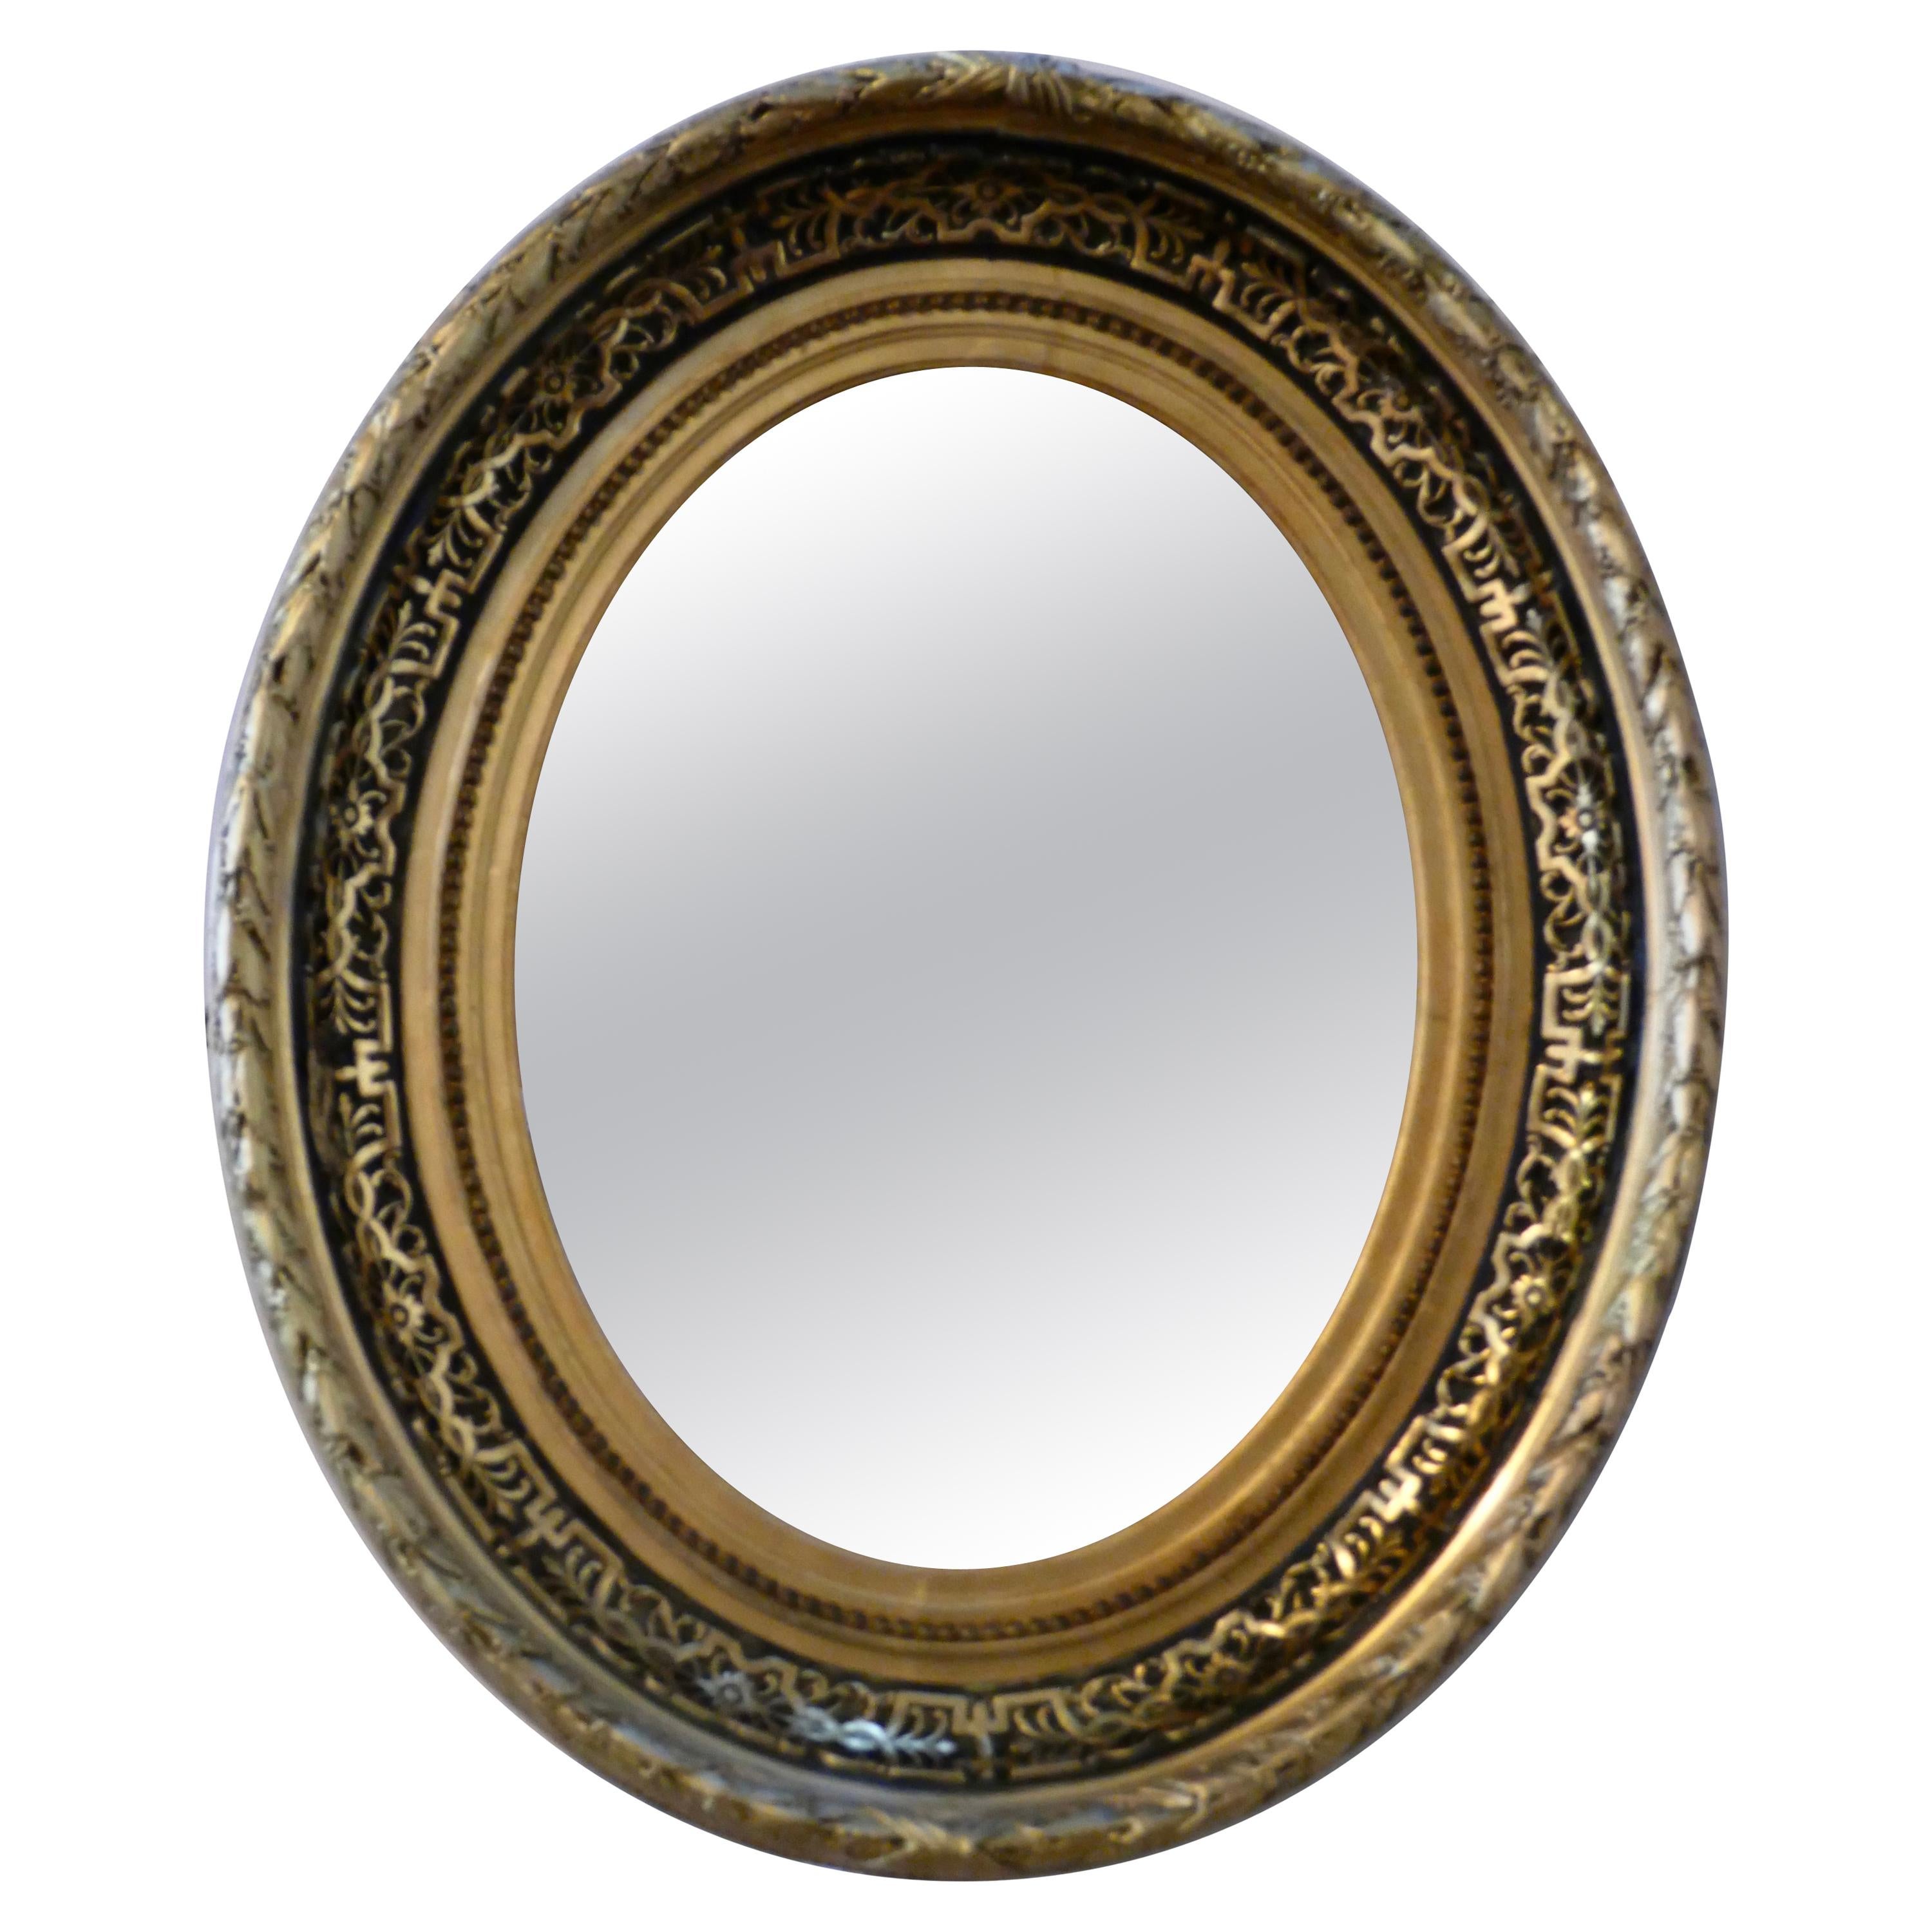 Superb Deep Oval Frame French Empire Gilt and Lacquer Wall Mirror